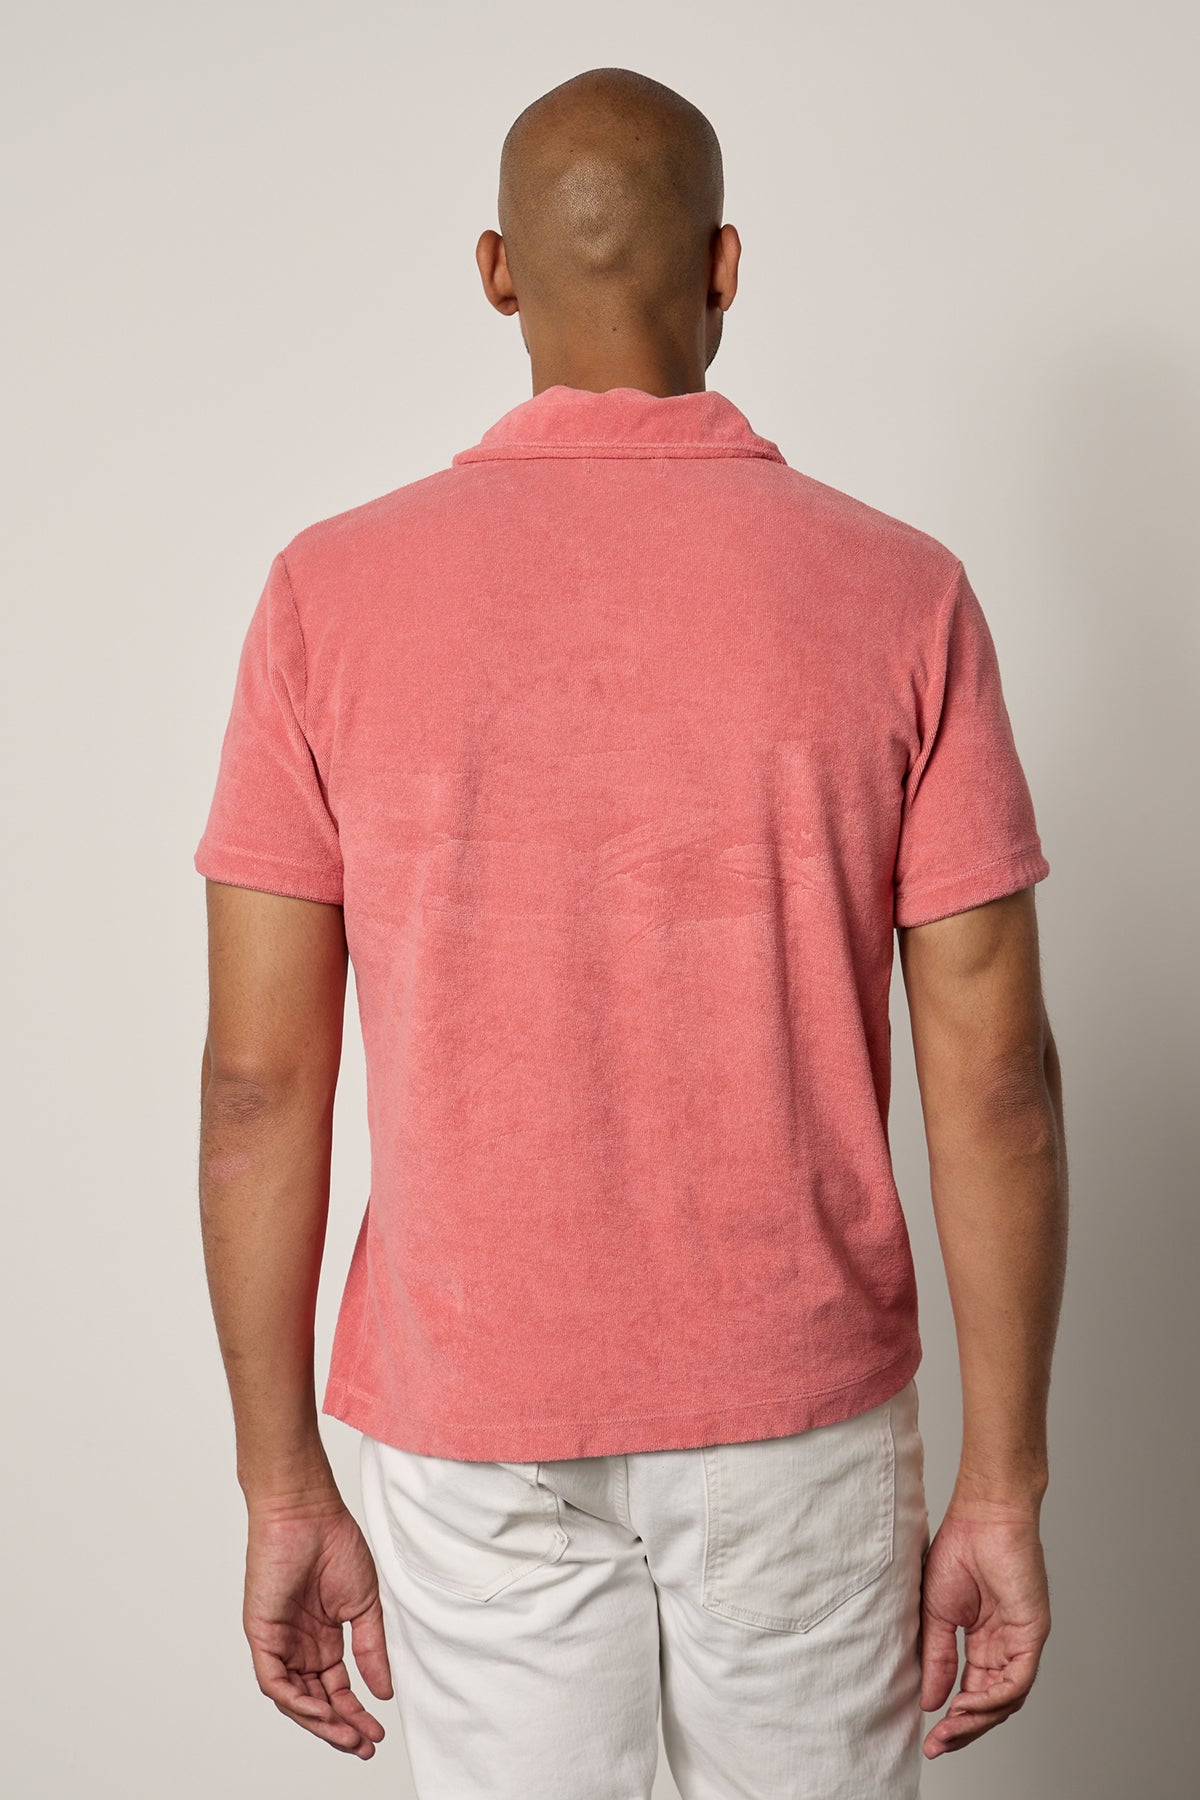 The back view of a man wearing a Velvet by Graham & Spencer BORIS TERRY POLO shirt.-26266324697281